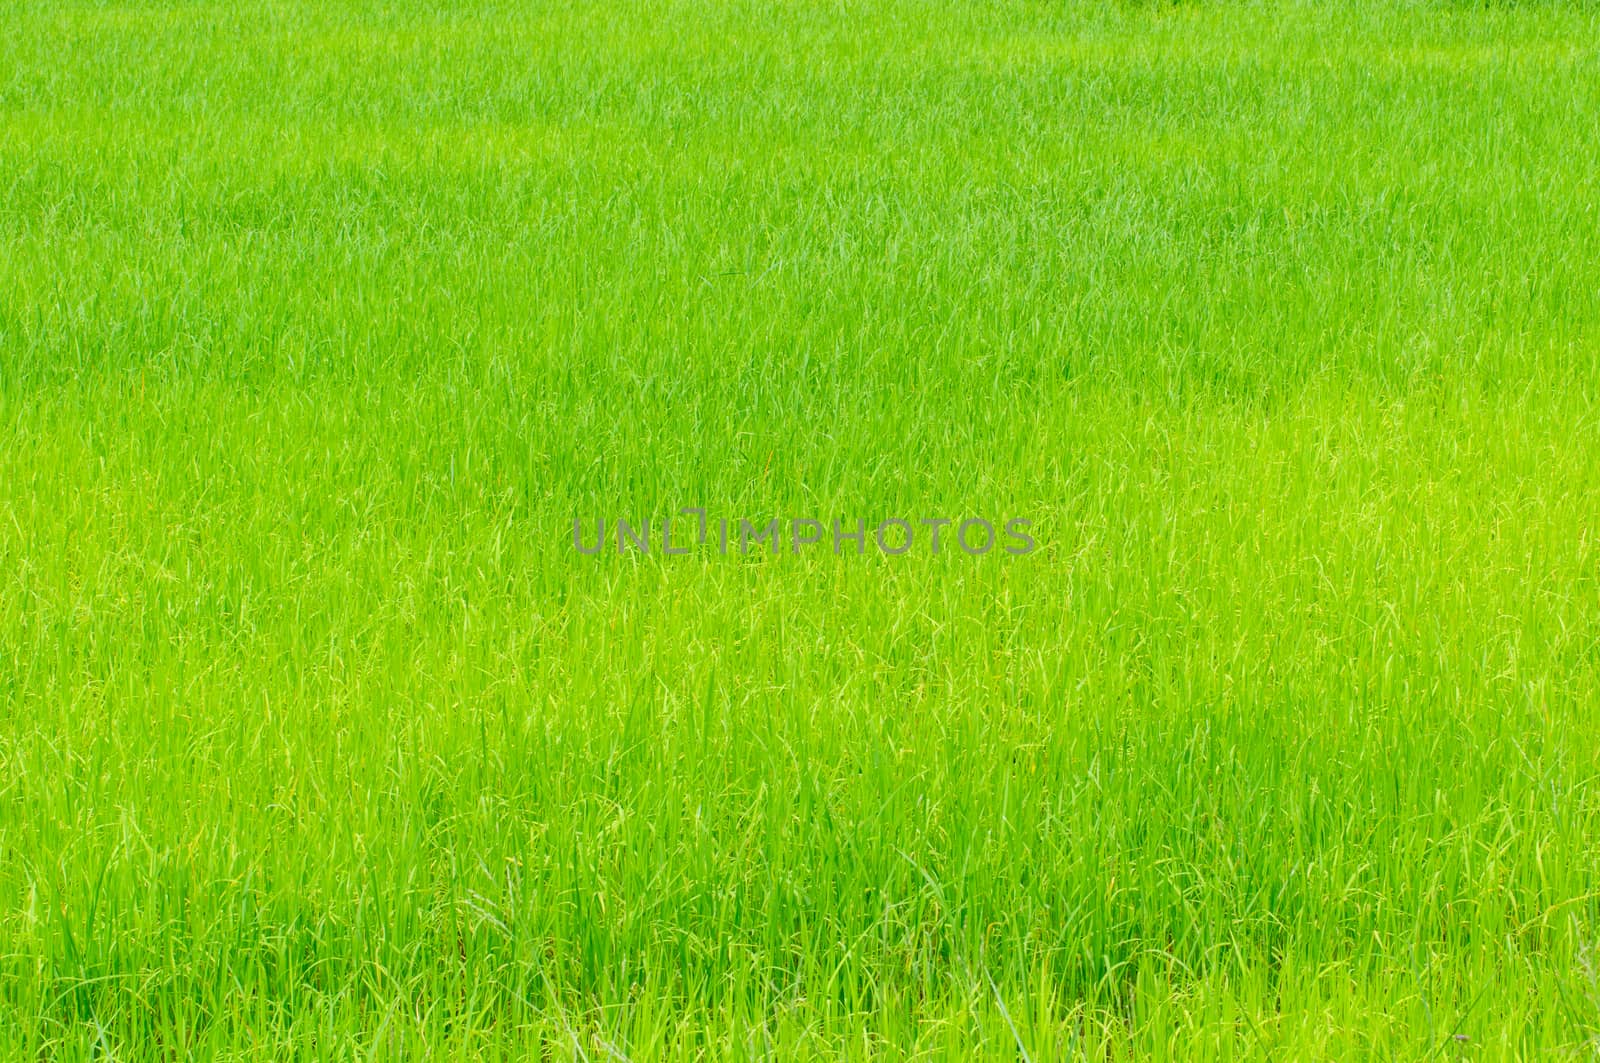 The green rice growing in cornfield, thailand